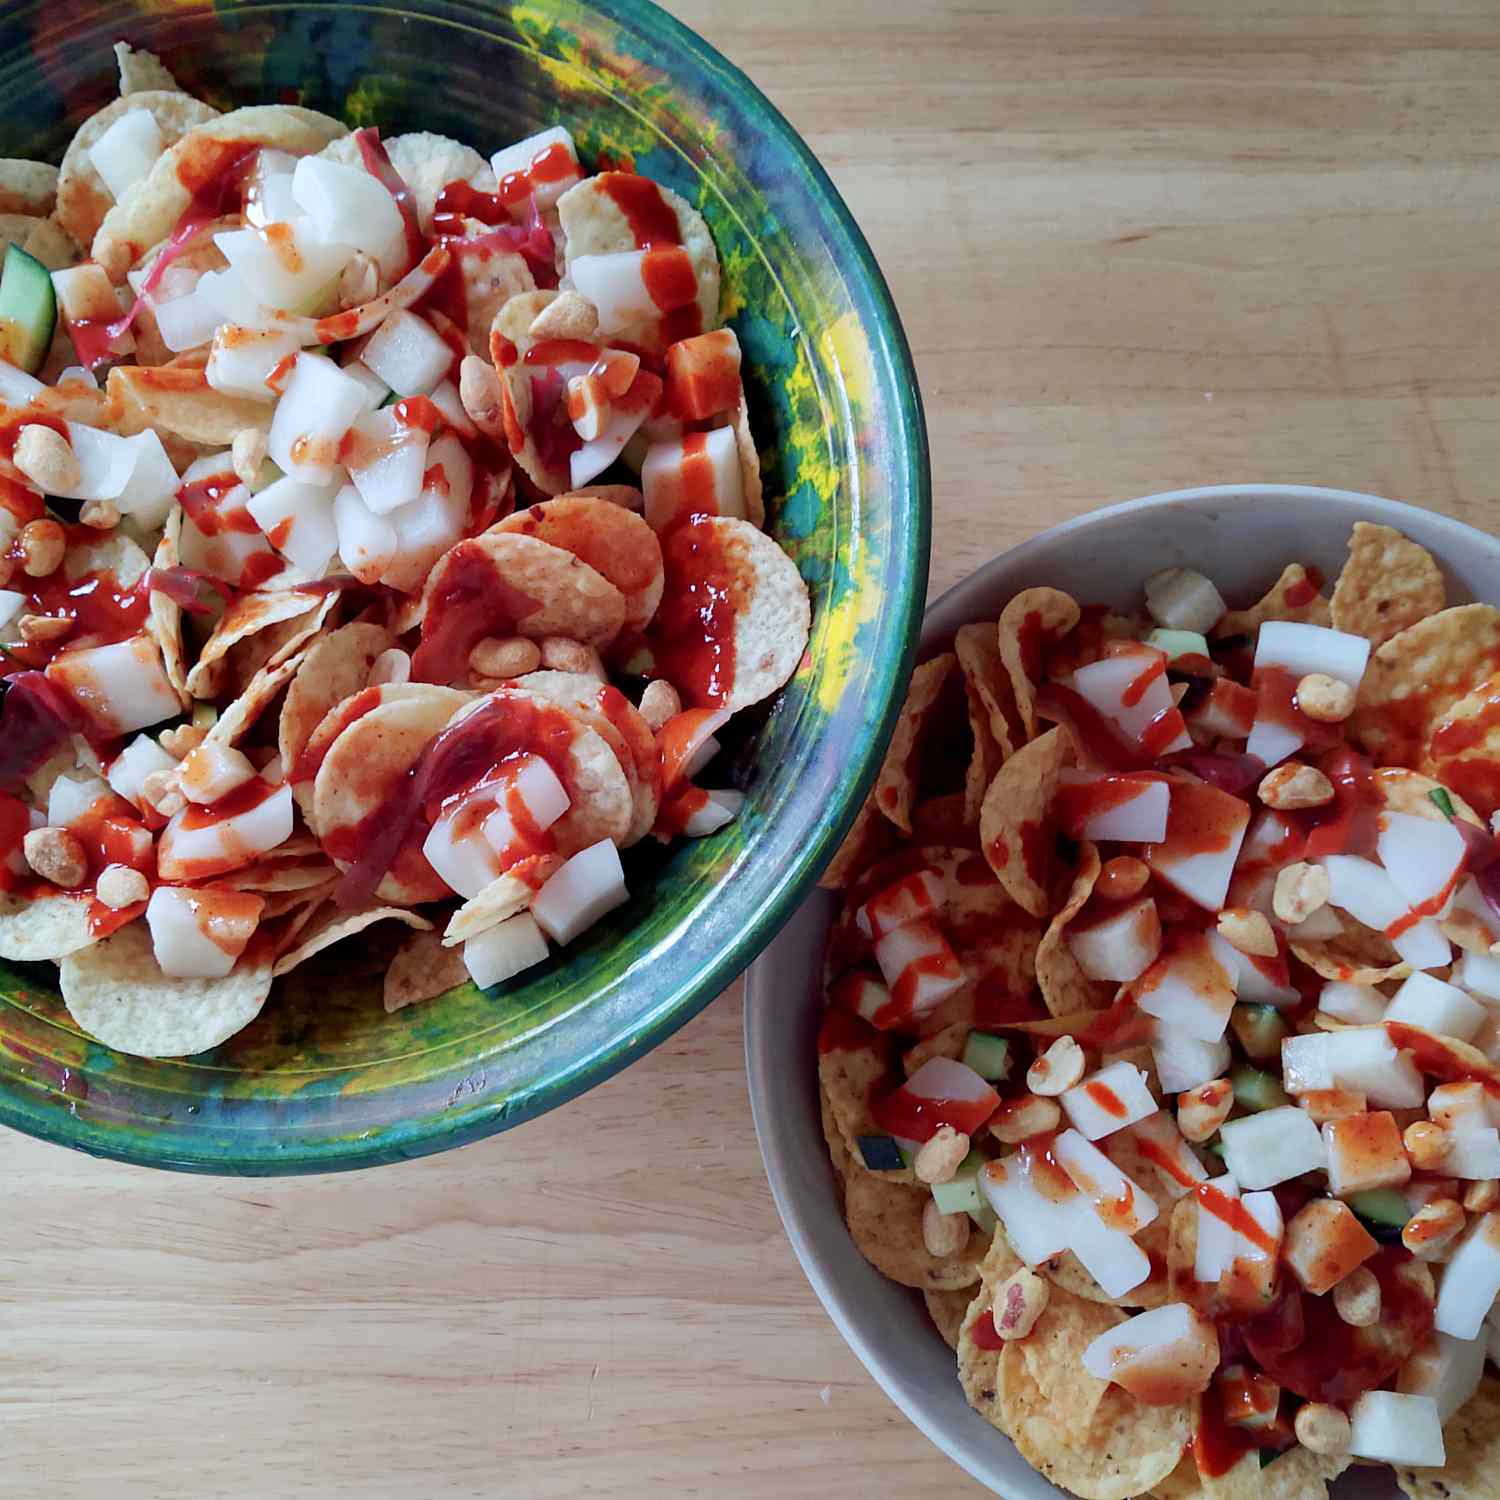 Tostitos in bowls topped with pickled coconut cueritos, peanuts, cucumber, hot sauce, chamoy, and TajÃ­n